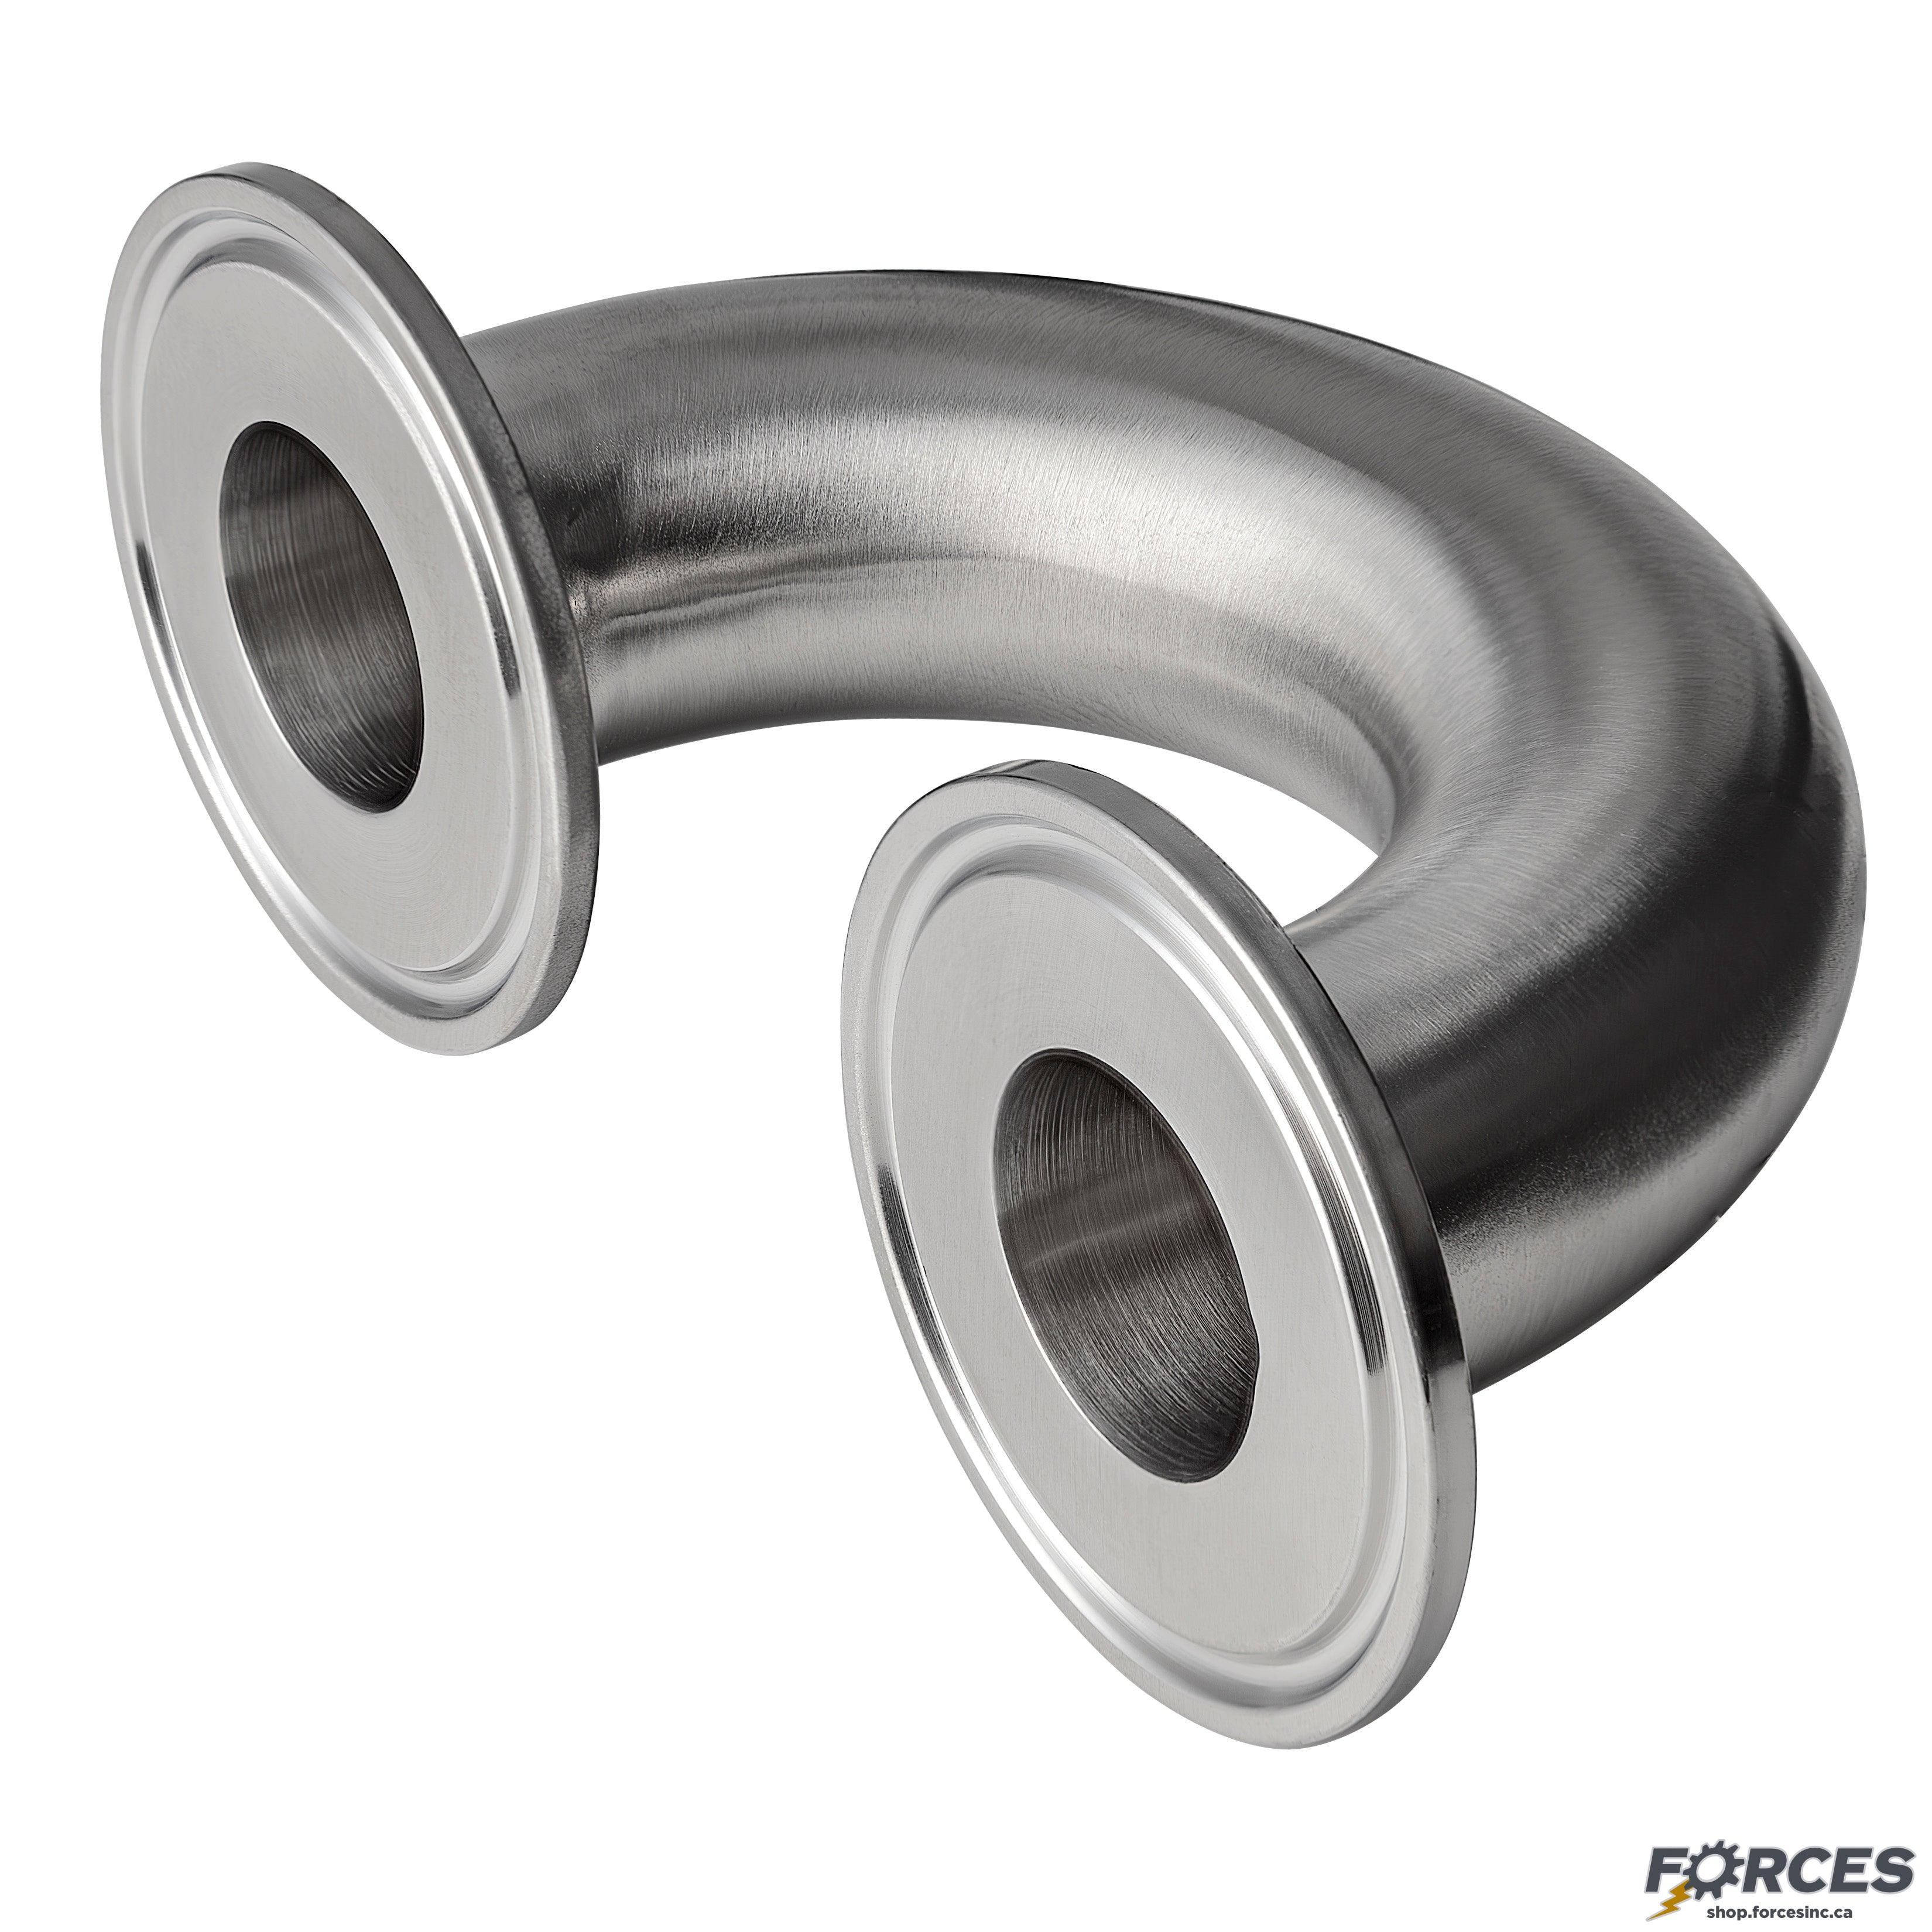 1-1/2" Tri-Clamp 180° Elbow - Stainless Steel 316 - Forces Inc